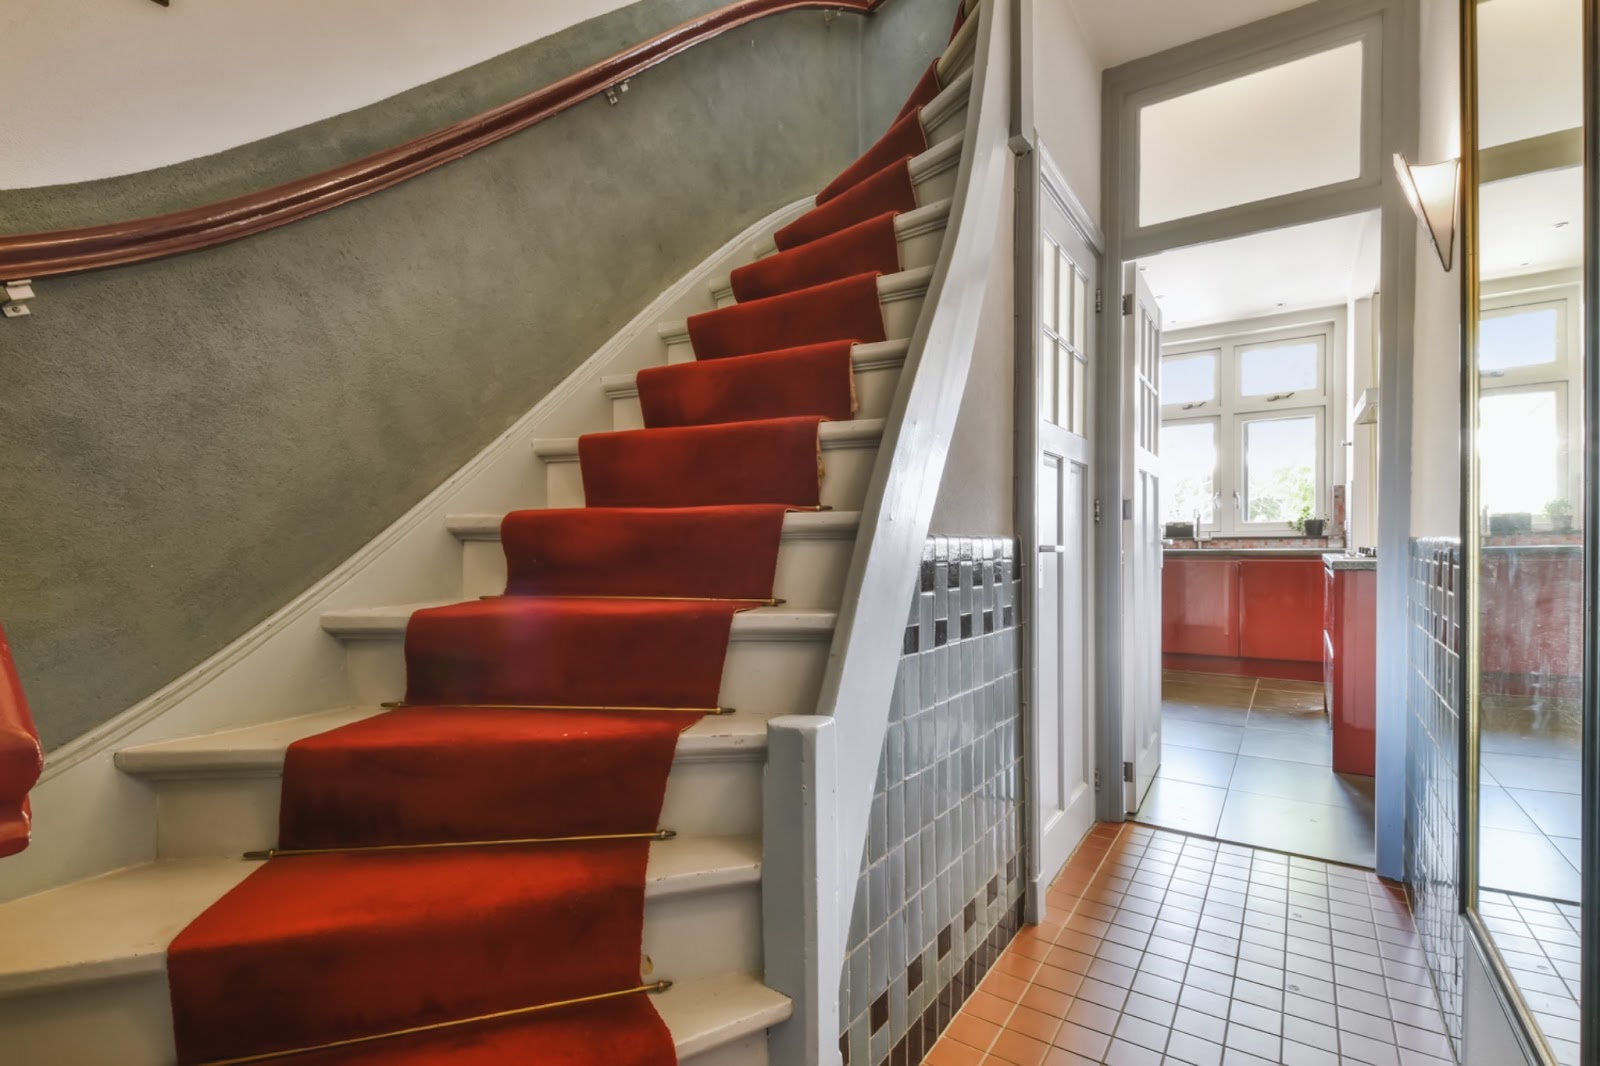 Regal, angular staircase with a dark red stair runner.